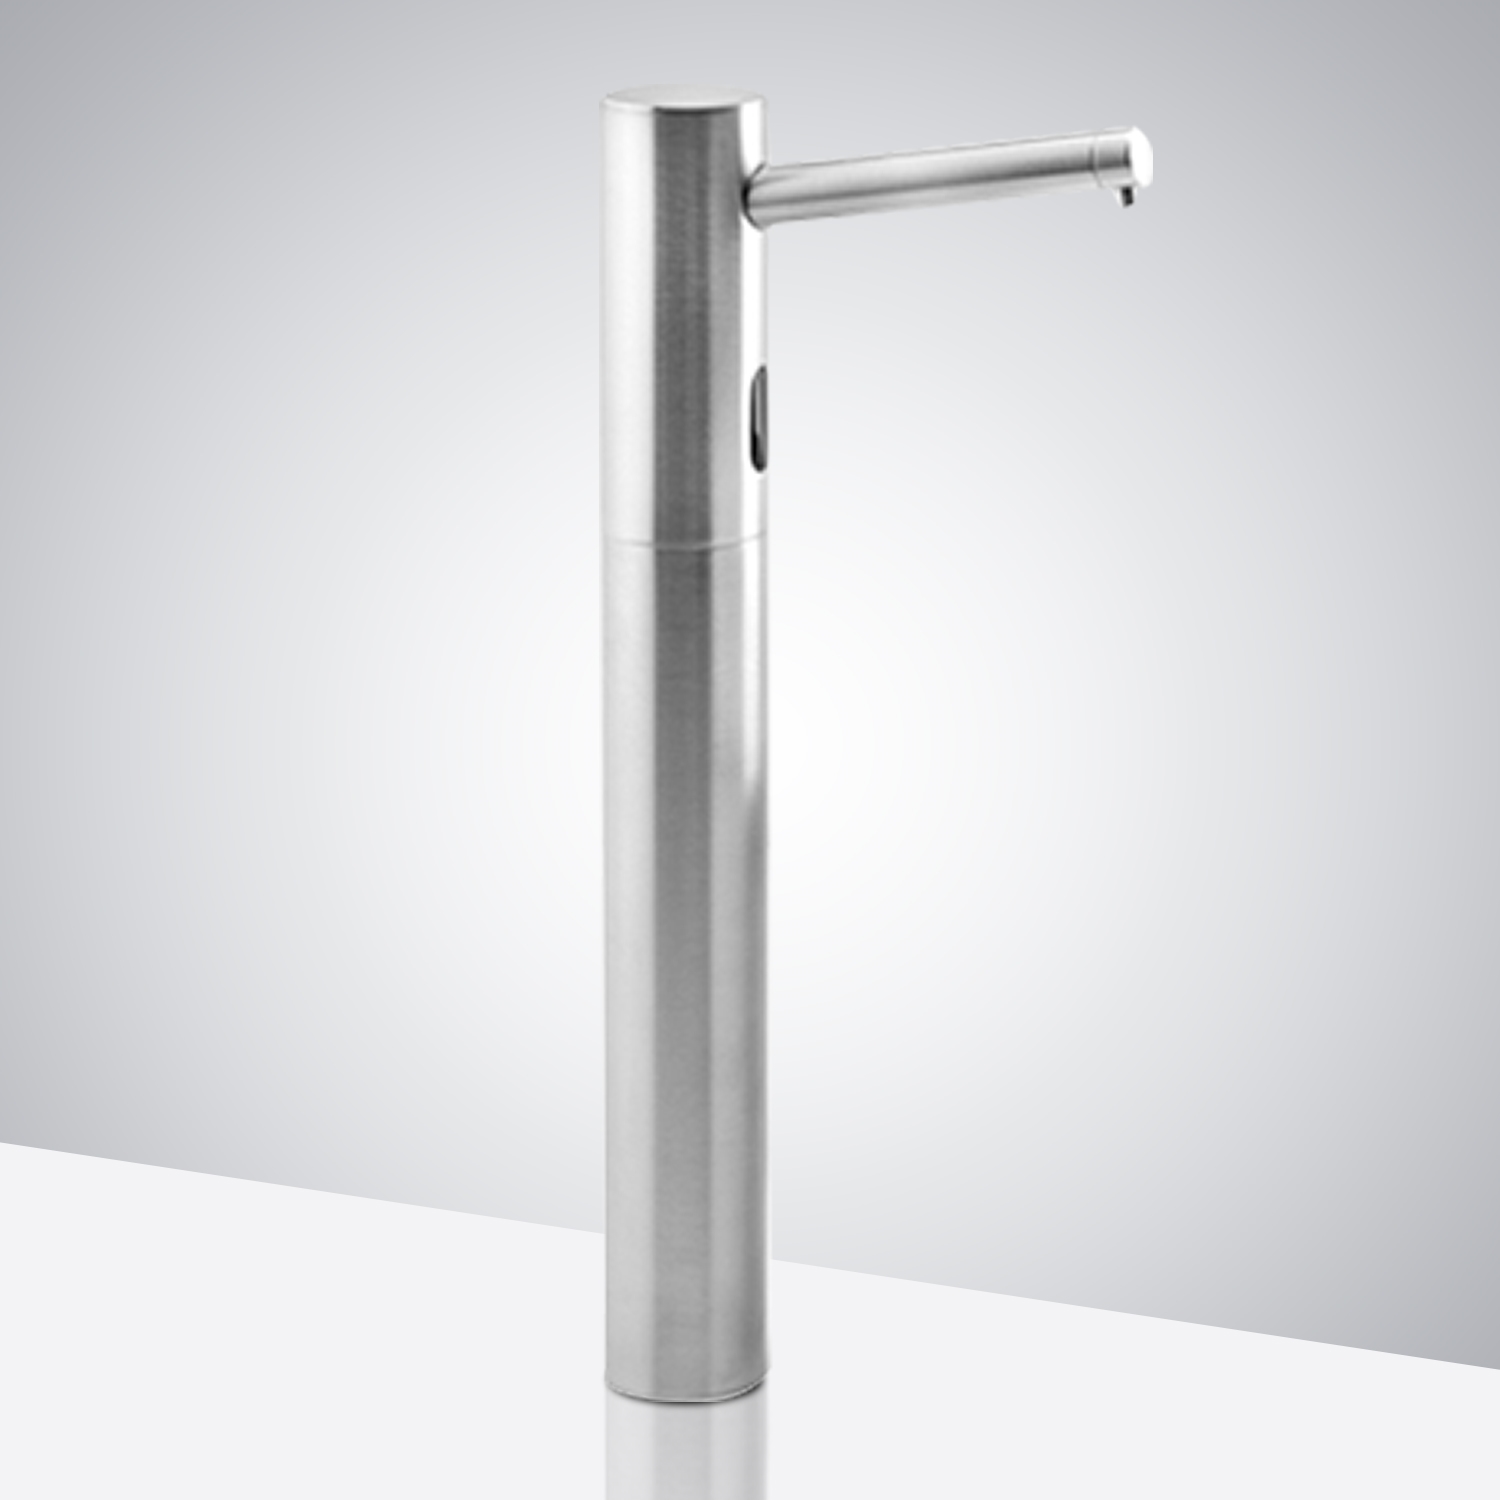 Tall Contemporary Automatic Commercial Soap Dispenser Touchless Motion Sensor Hands Free